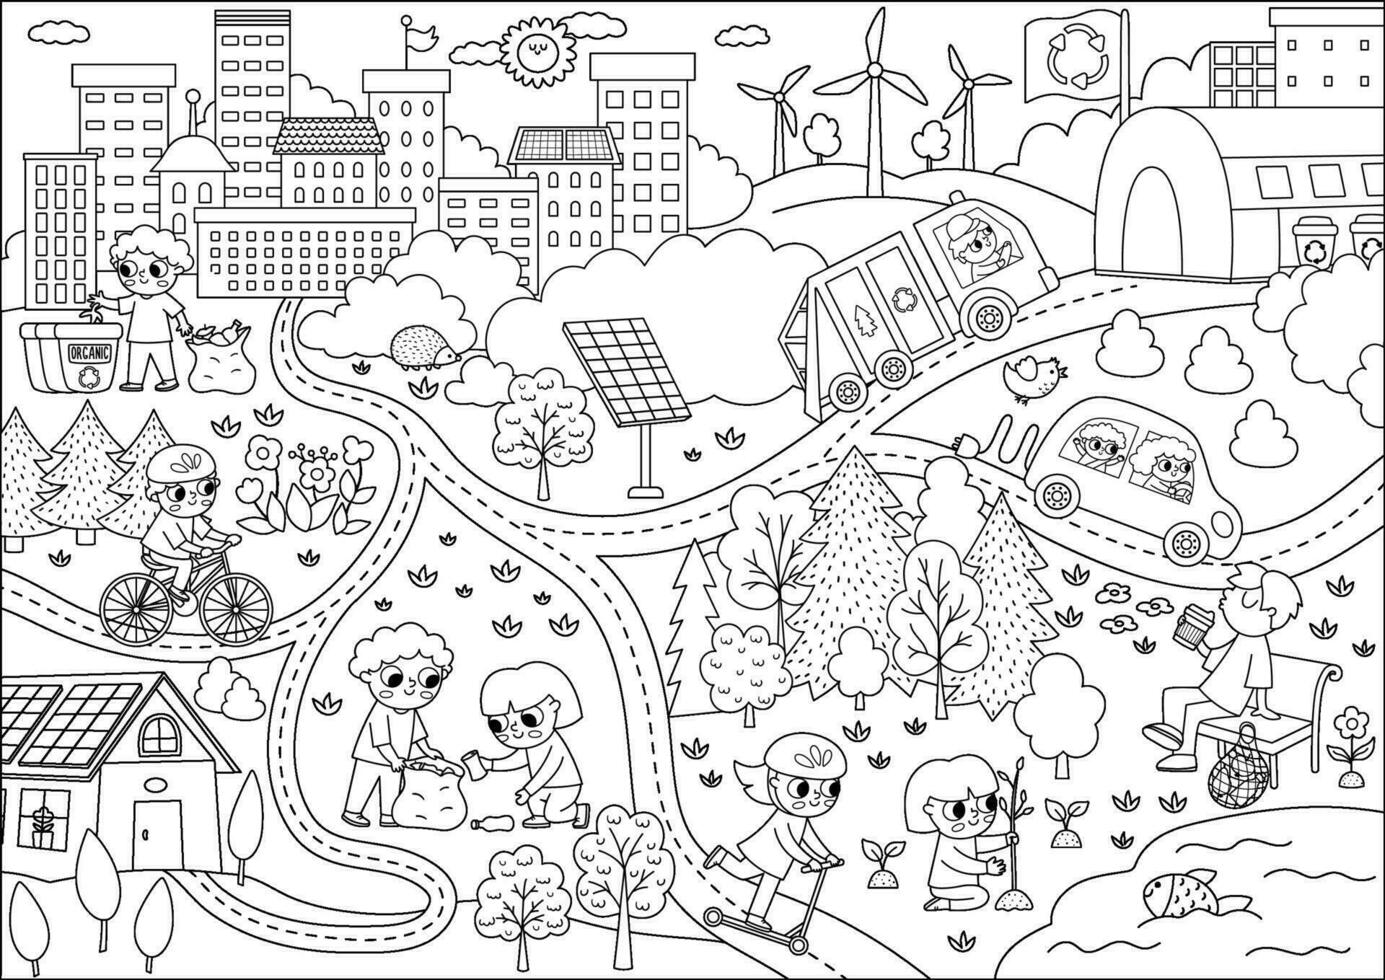 Vector black and white eco city scene. Ecological town line landscape with alternative transport, energy concept. Green city illustration with children caring of environment. Earth day coloring page